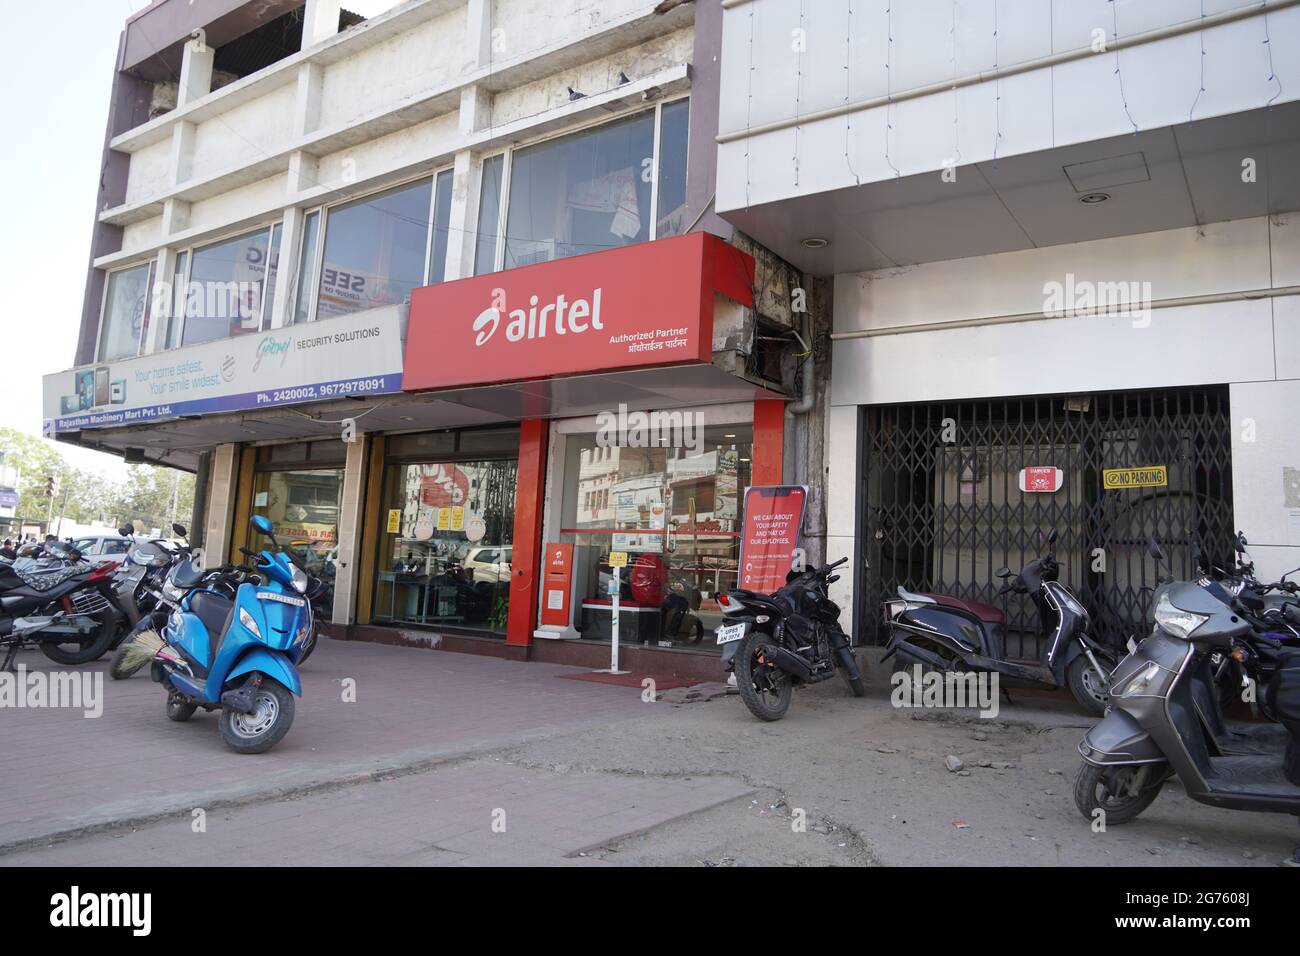 Bharti Airtel Shop Front. Airtel distributor storefront. Udaipur India - May 2020 POI Stock Photo